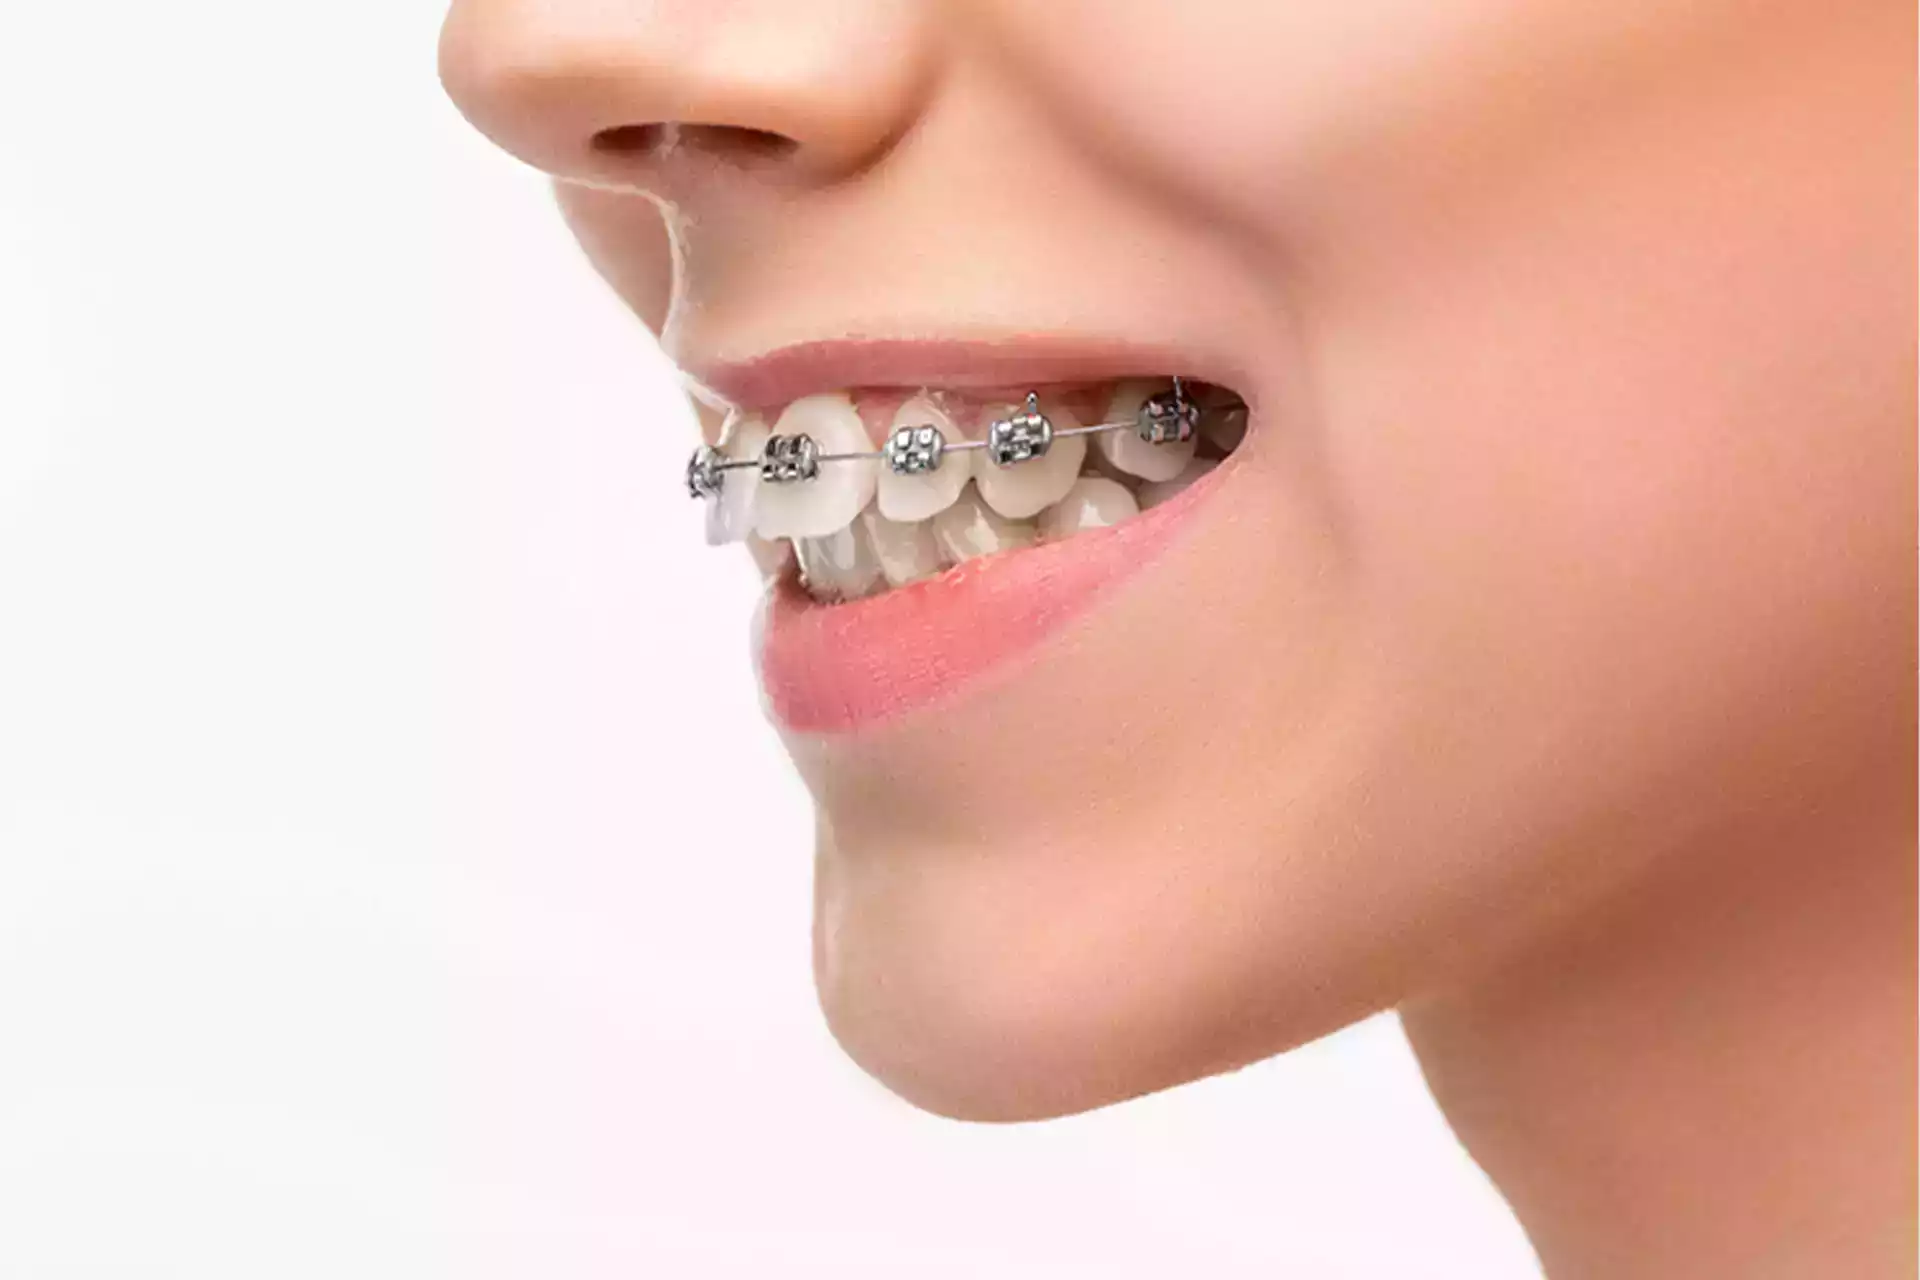 https://www.verasmile.com/wp-content/uploads/2021/05/Fixing-an-Overbite-with-Crowns-Does-It-Work-min-min-min.webp